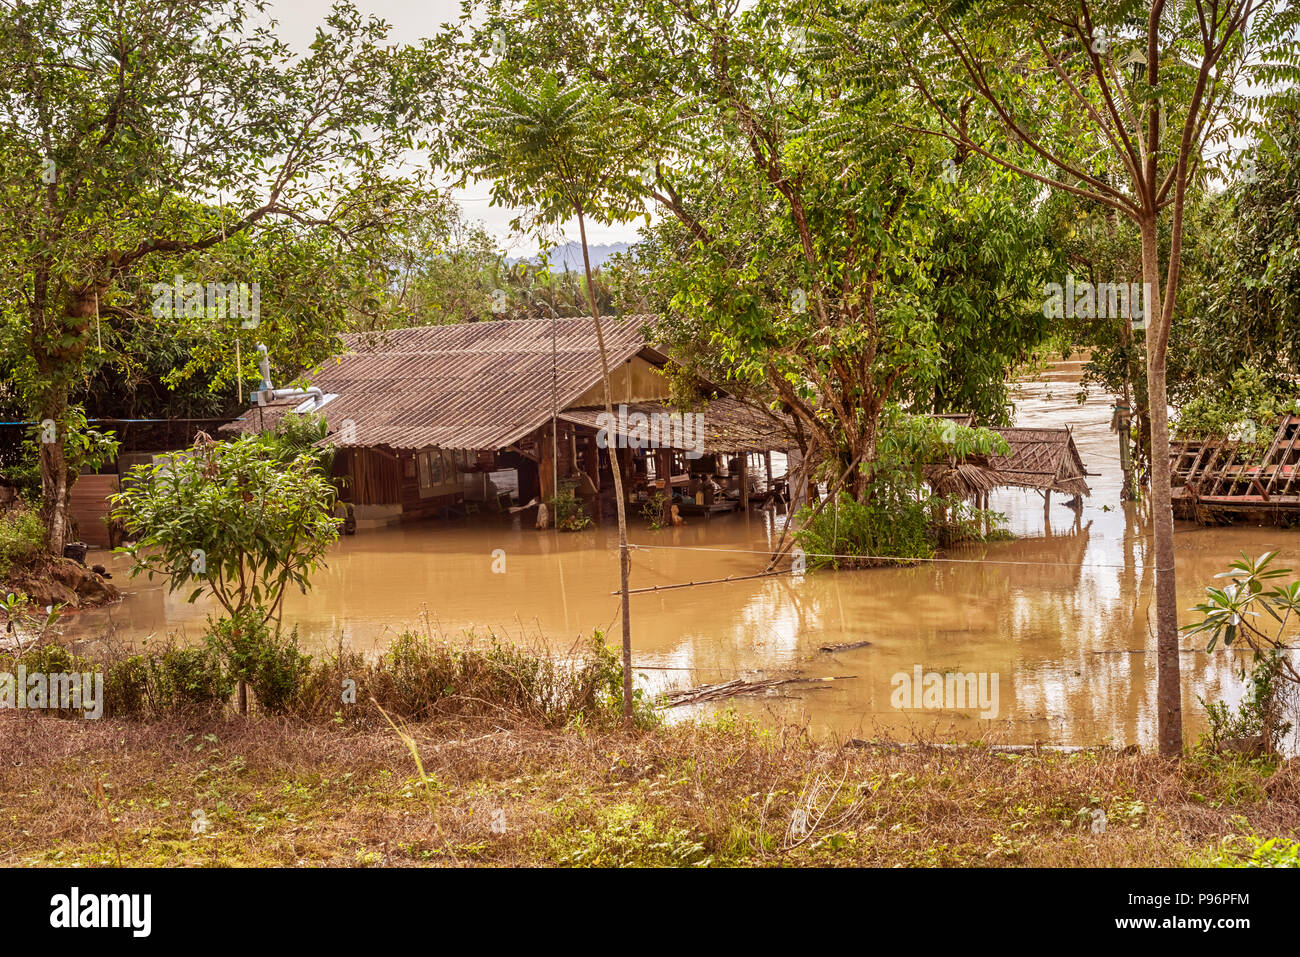 Trang, Thailand - December 4, 2017: Flooded roads and villages in South Thailand travelling in Trang province of Thailand. Stock Photo